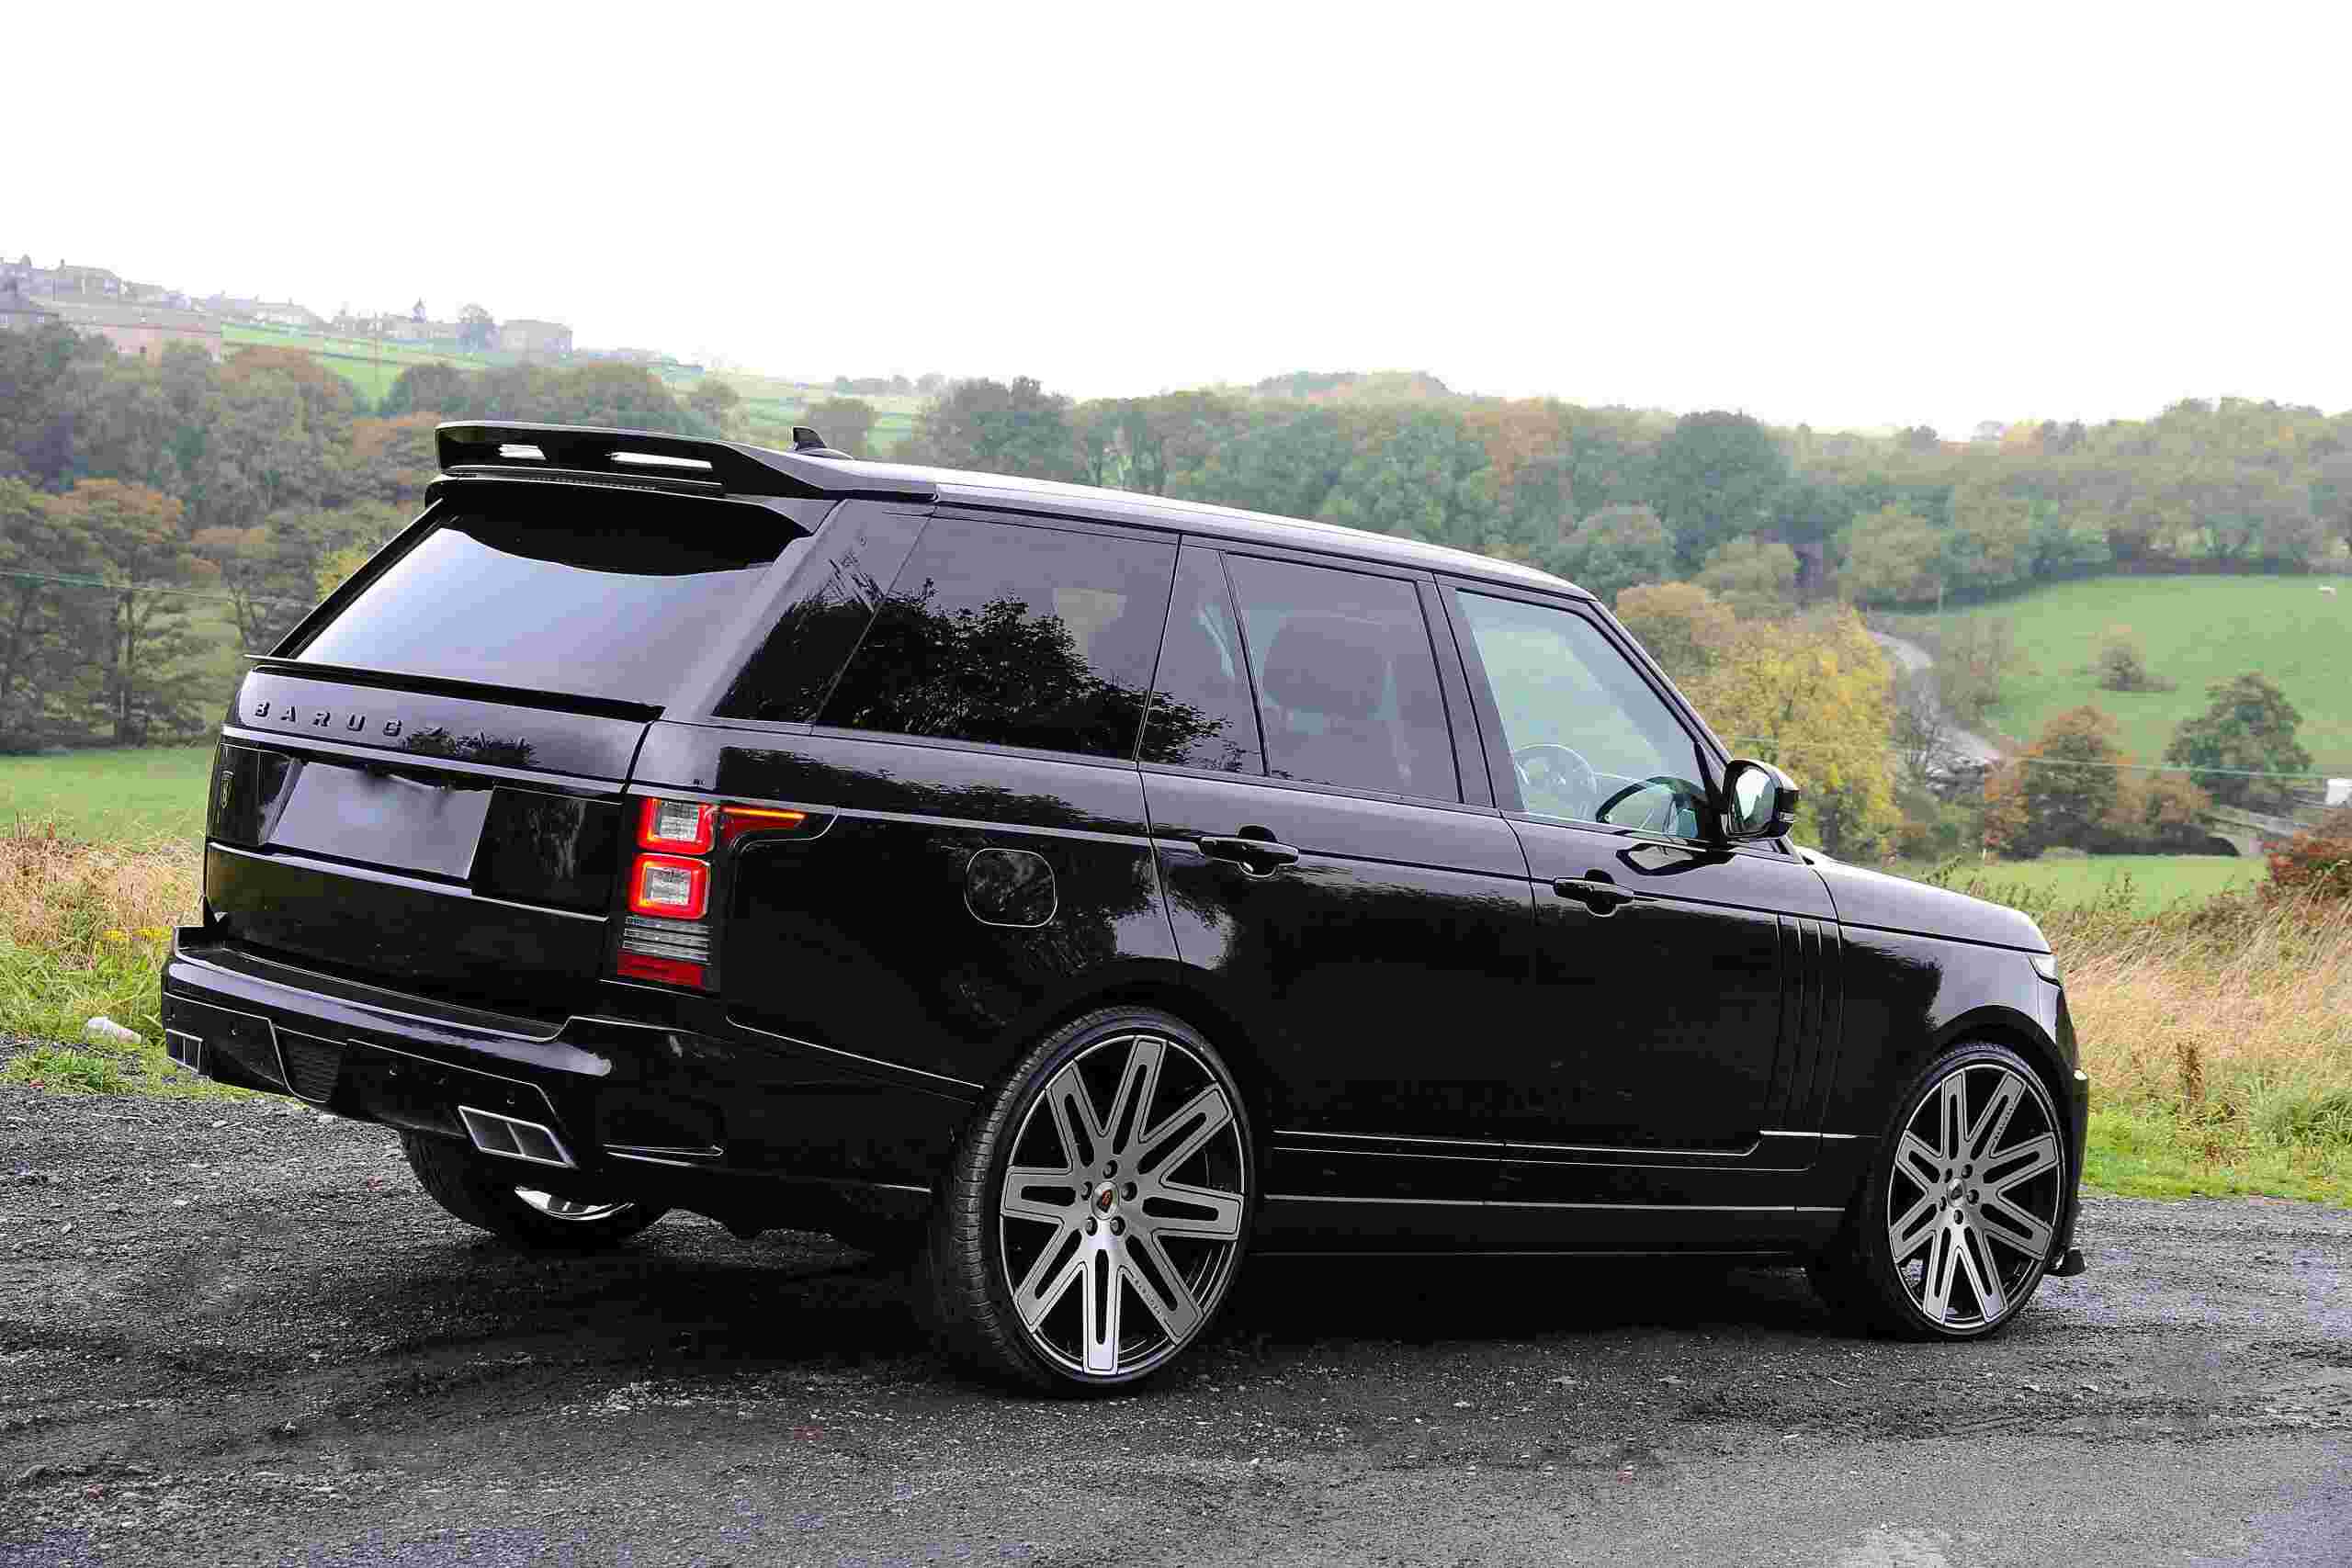 Check our price and buy Barugzai  L405 Vogue Luxe body kit for Land Rover Range Rover